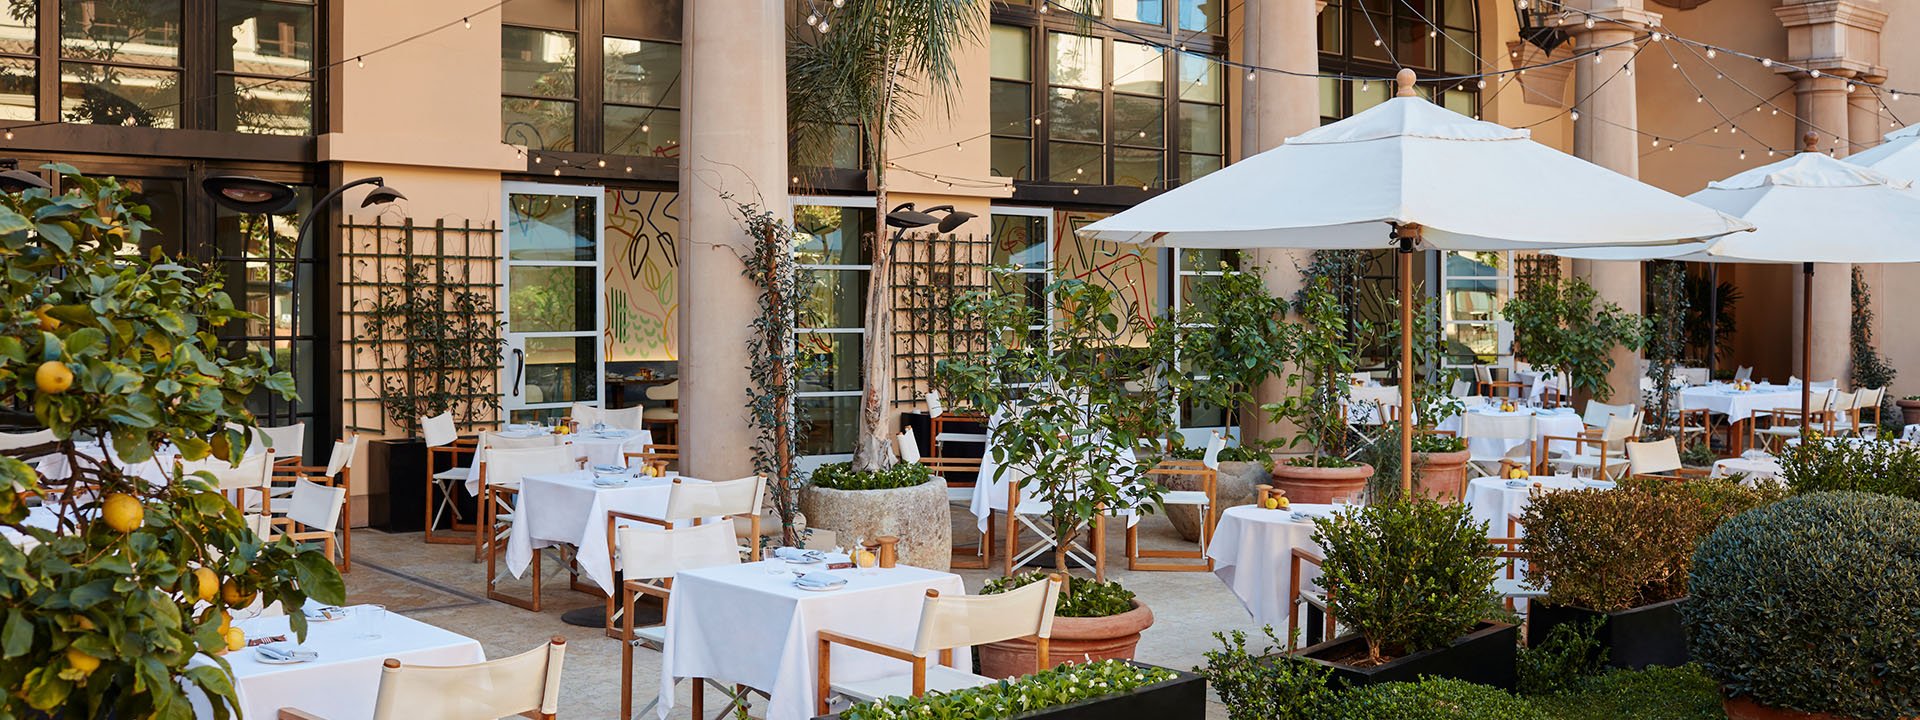 The Terrace Outdoor Restaurant | The Maybourne Beverly Hills